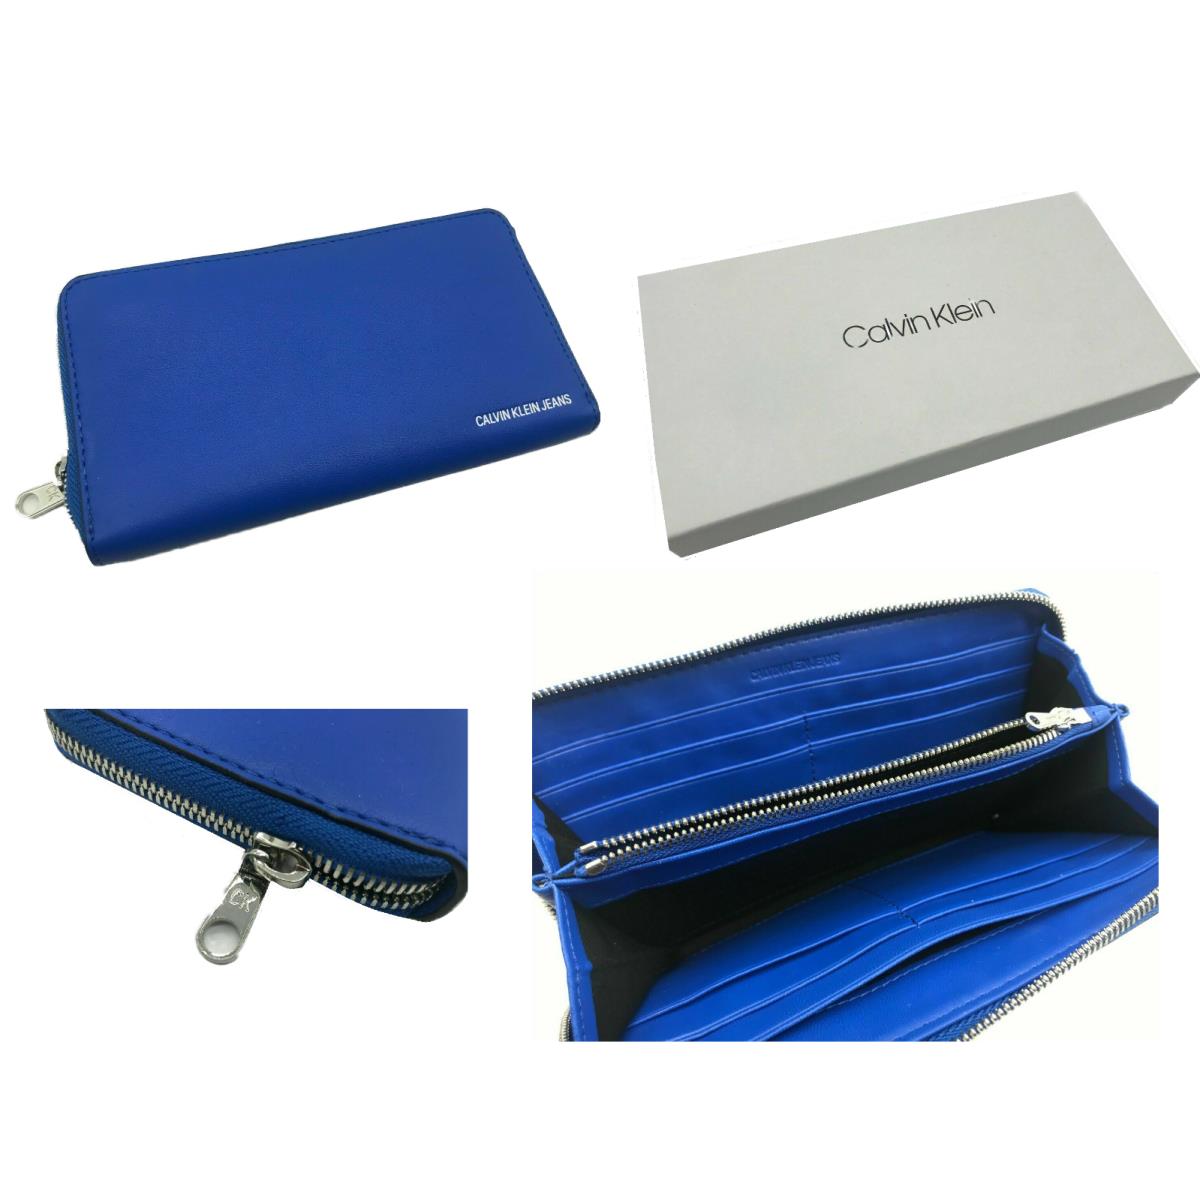 Calvin Klein Jeans Limited Edition Gift Box Sculpted Embossed Logo Lg Zip Wallet